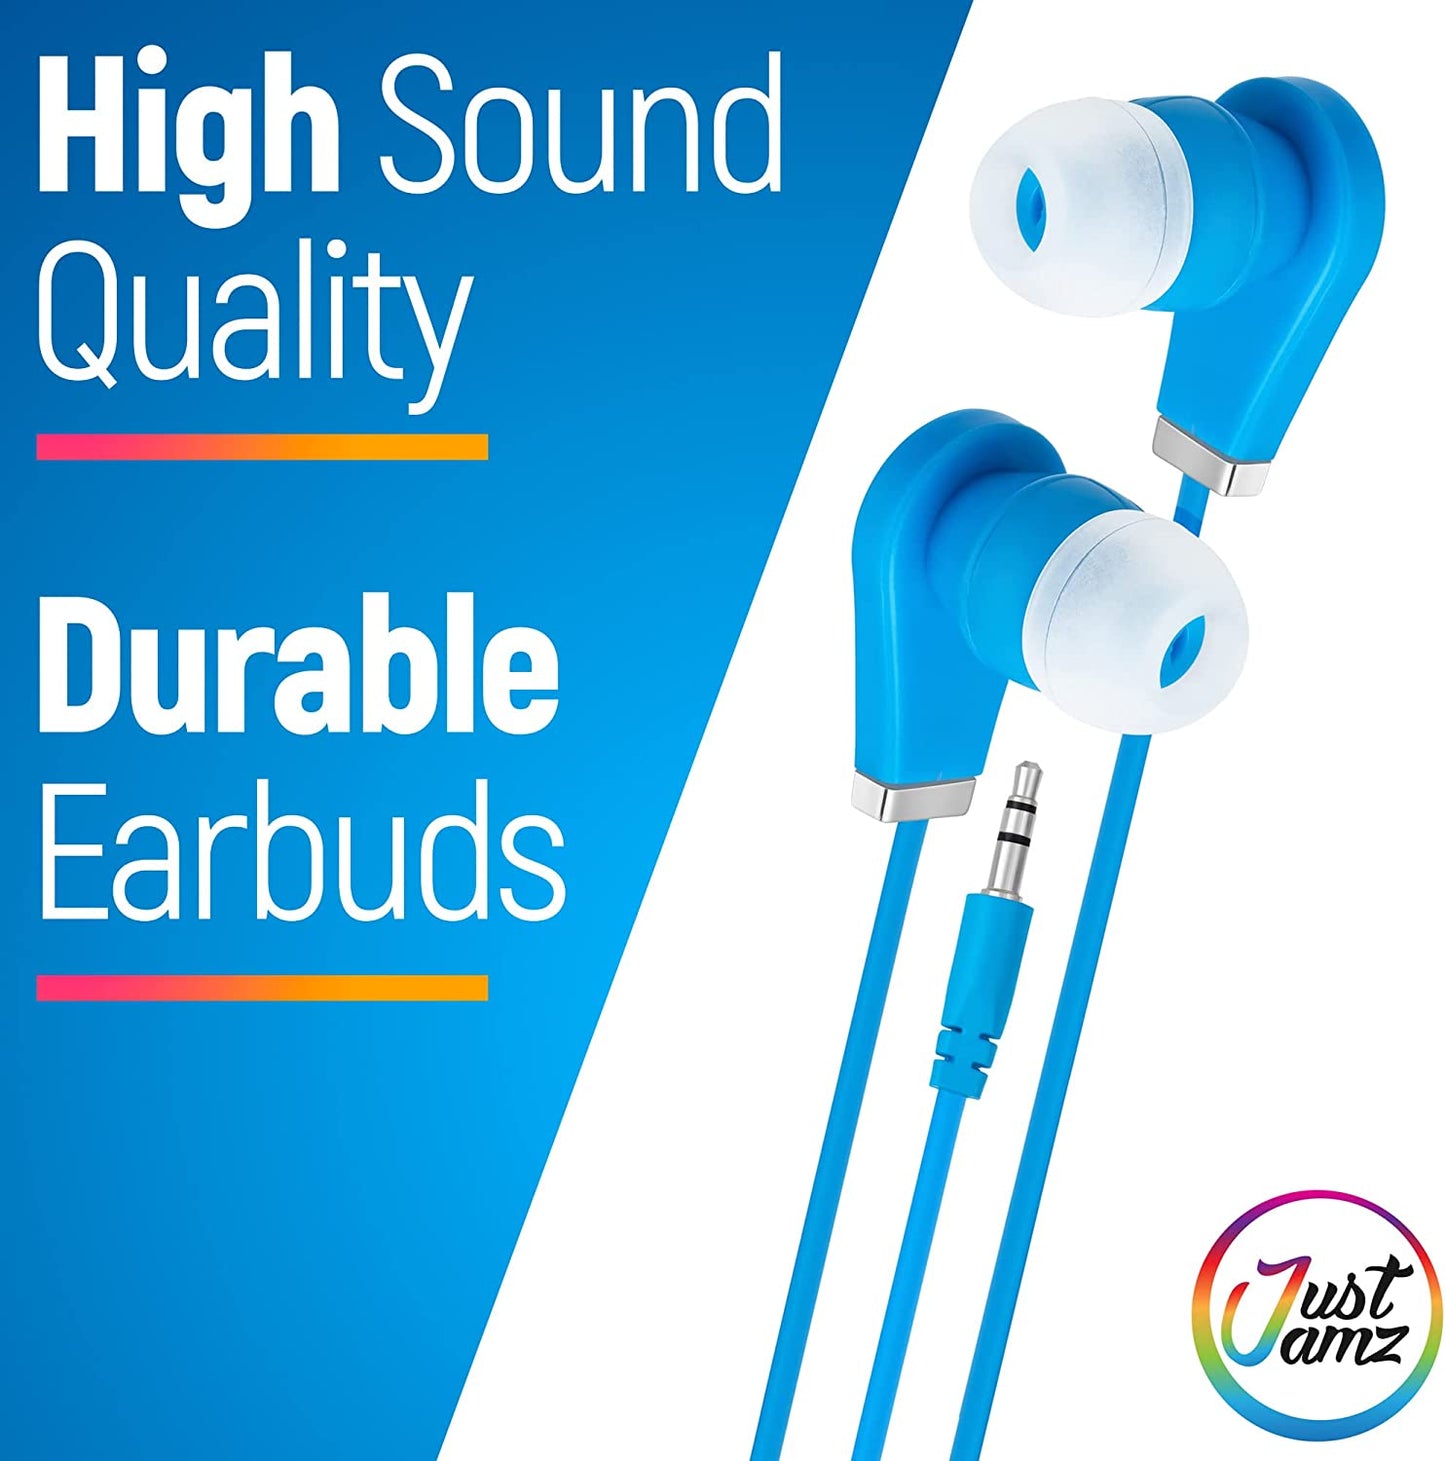 100 Pack of in-Ear EarBuds, Wired and great for Kids, Mixed Colors (Europe)